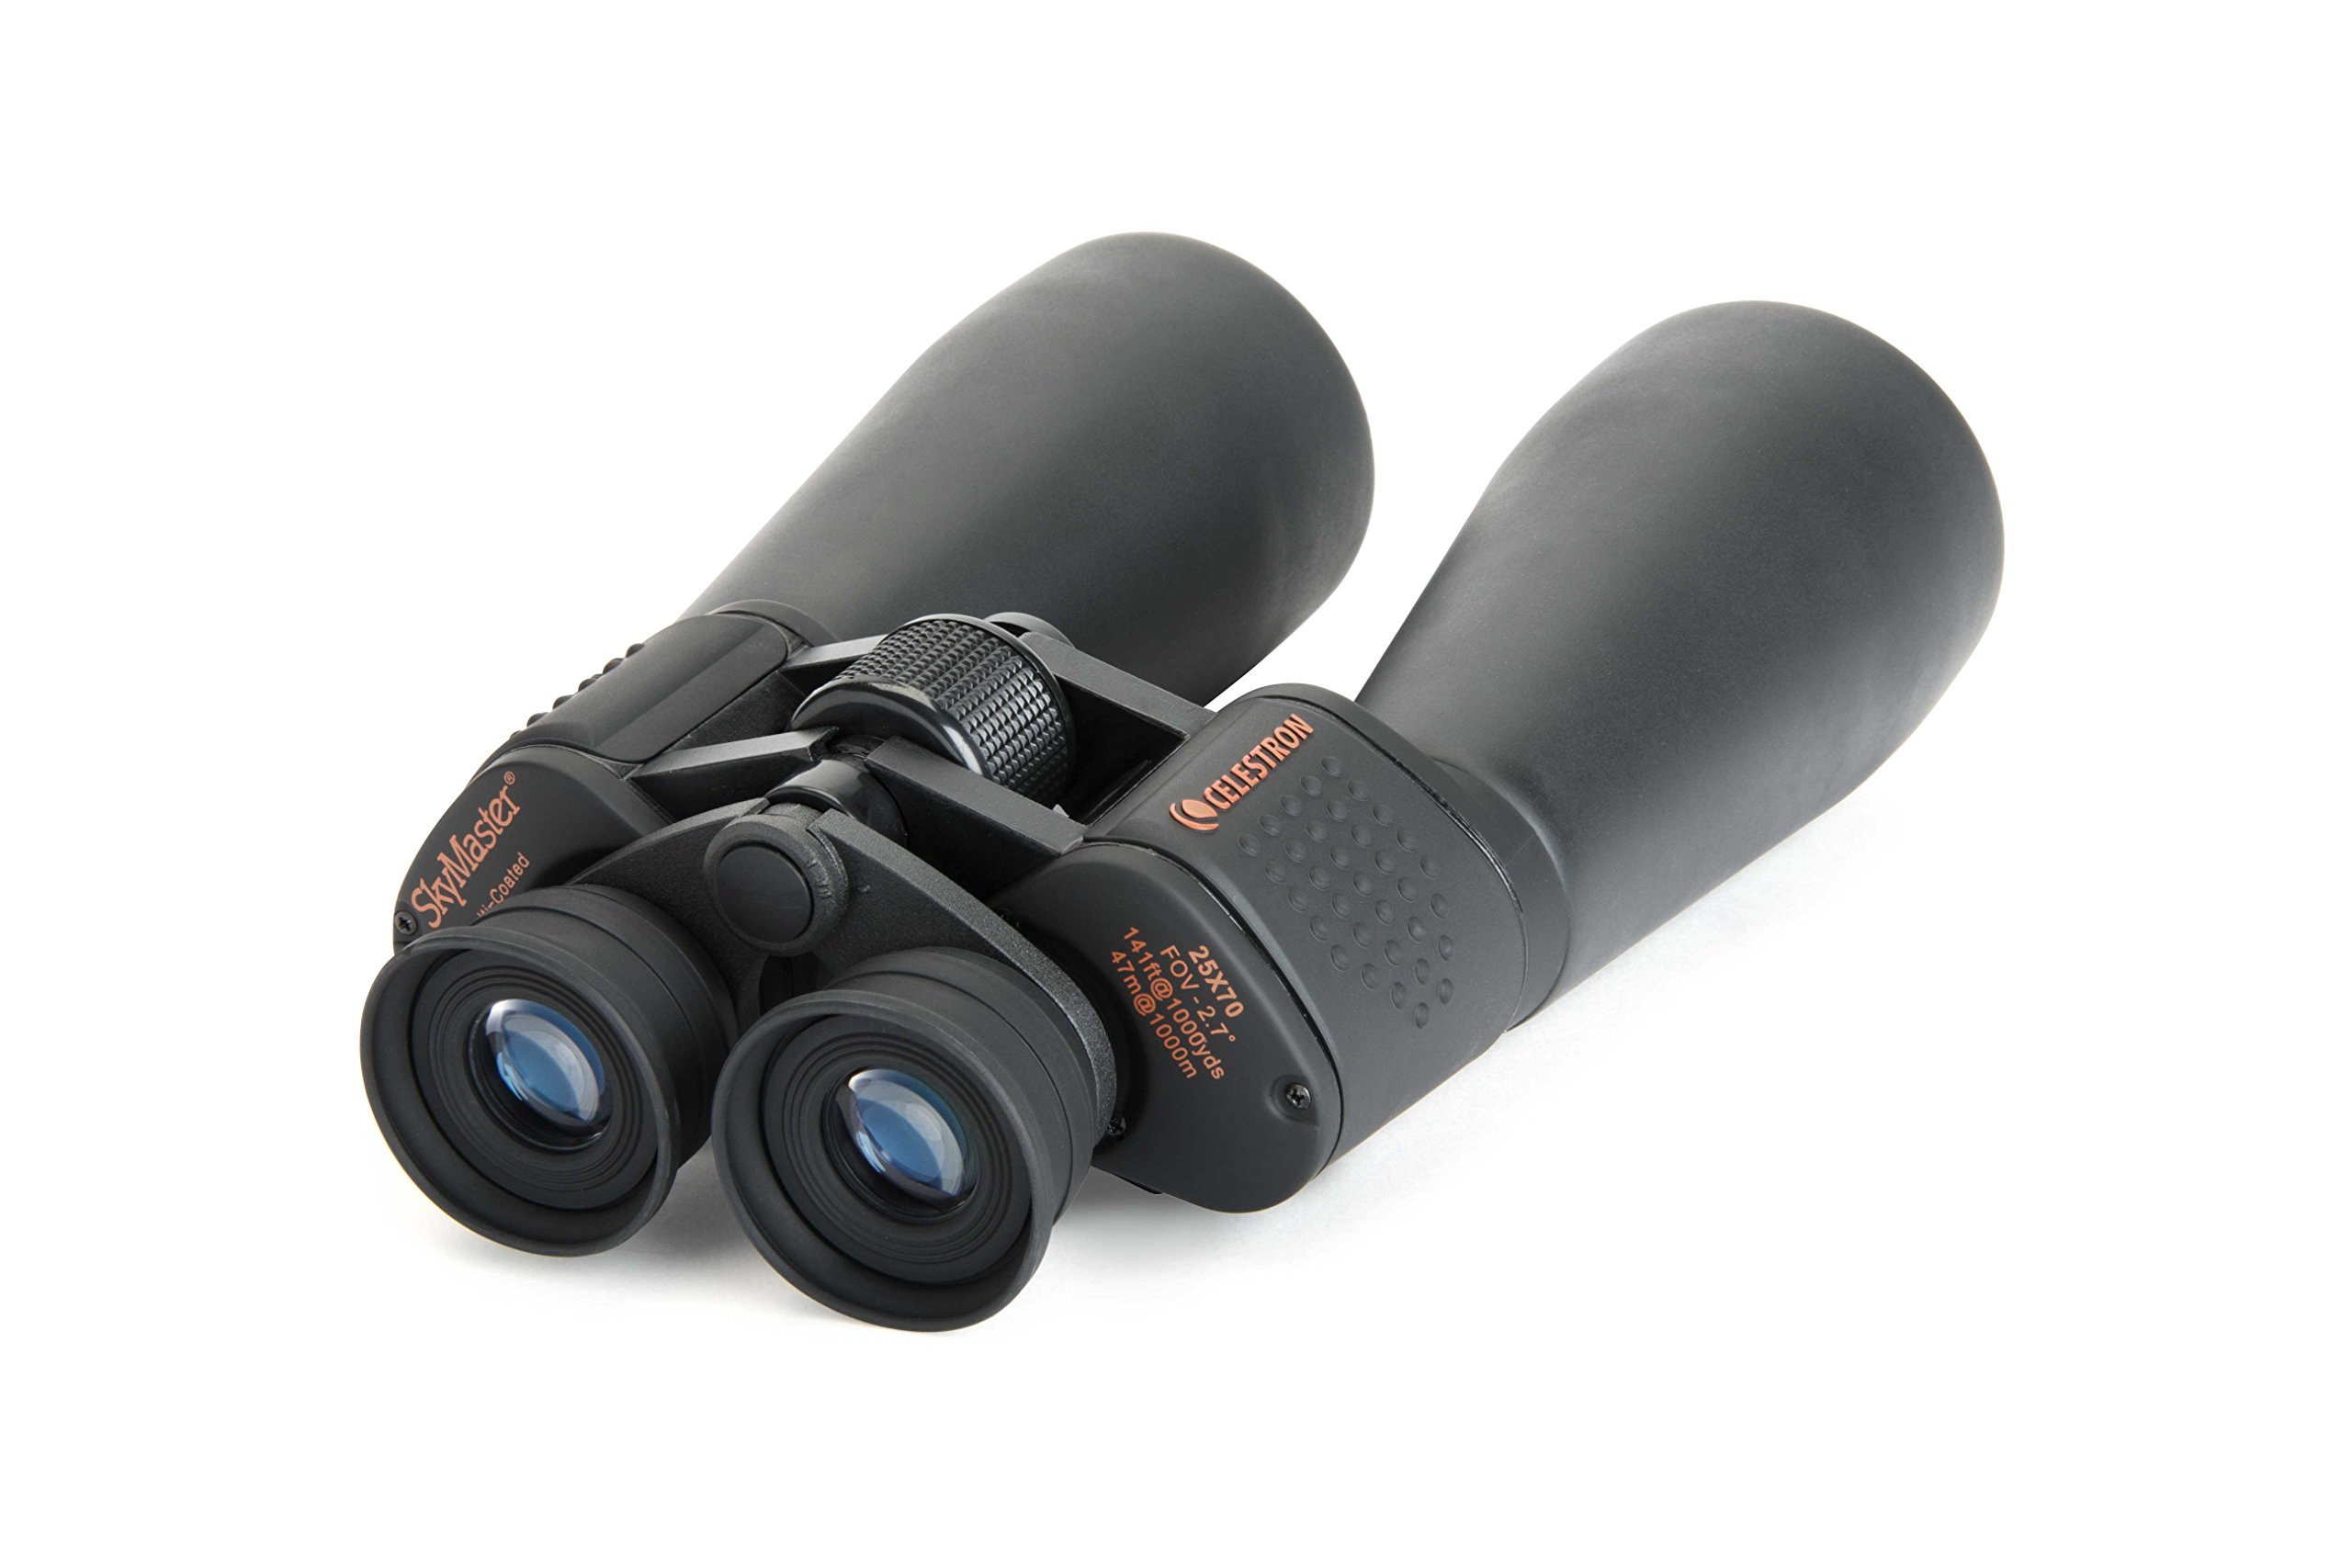 Celestron – SkyMaster 25X70 Binocular – Outdoor and Astronomy Binoculars – Powerful 25x Magnification – Large Aperture for Long Distance Viewing – Multi-coated Optics – Carrying Case Included